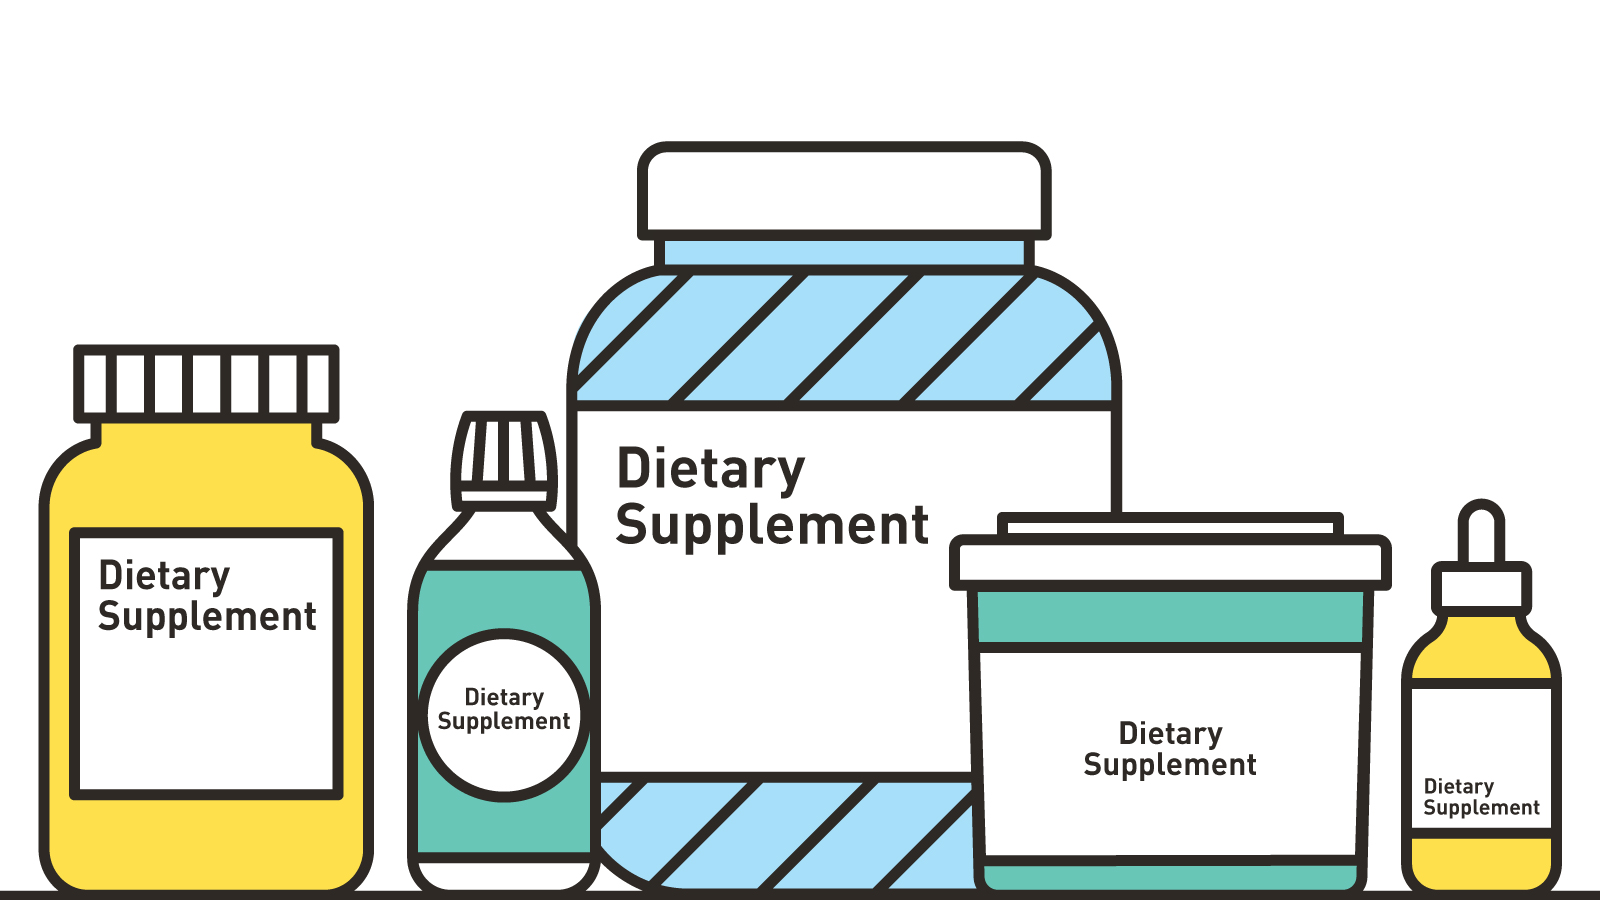 Supplement Your Knowledge -  Dietary Supplement Education Initiative